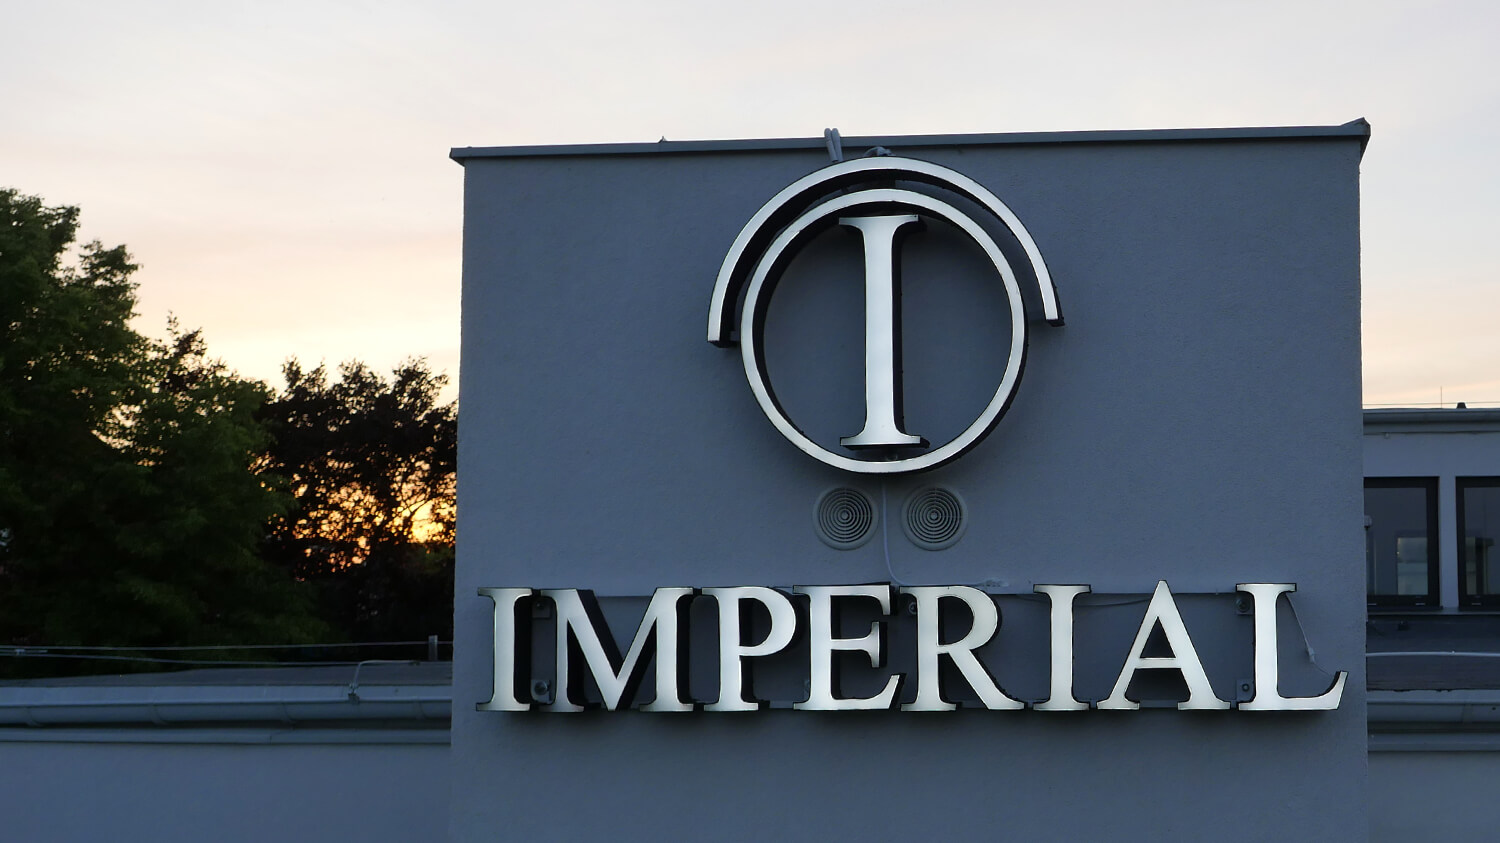 Imperial - Imperial Hotel - LED spatial lettering on the wall